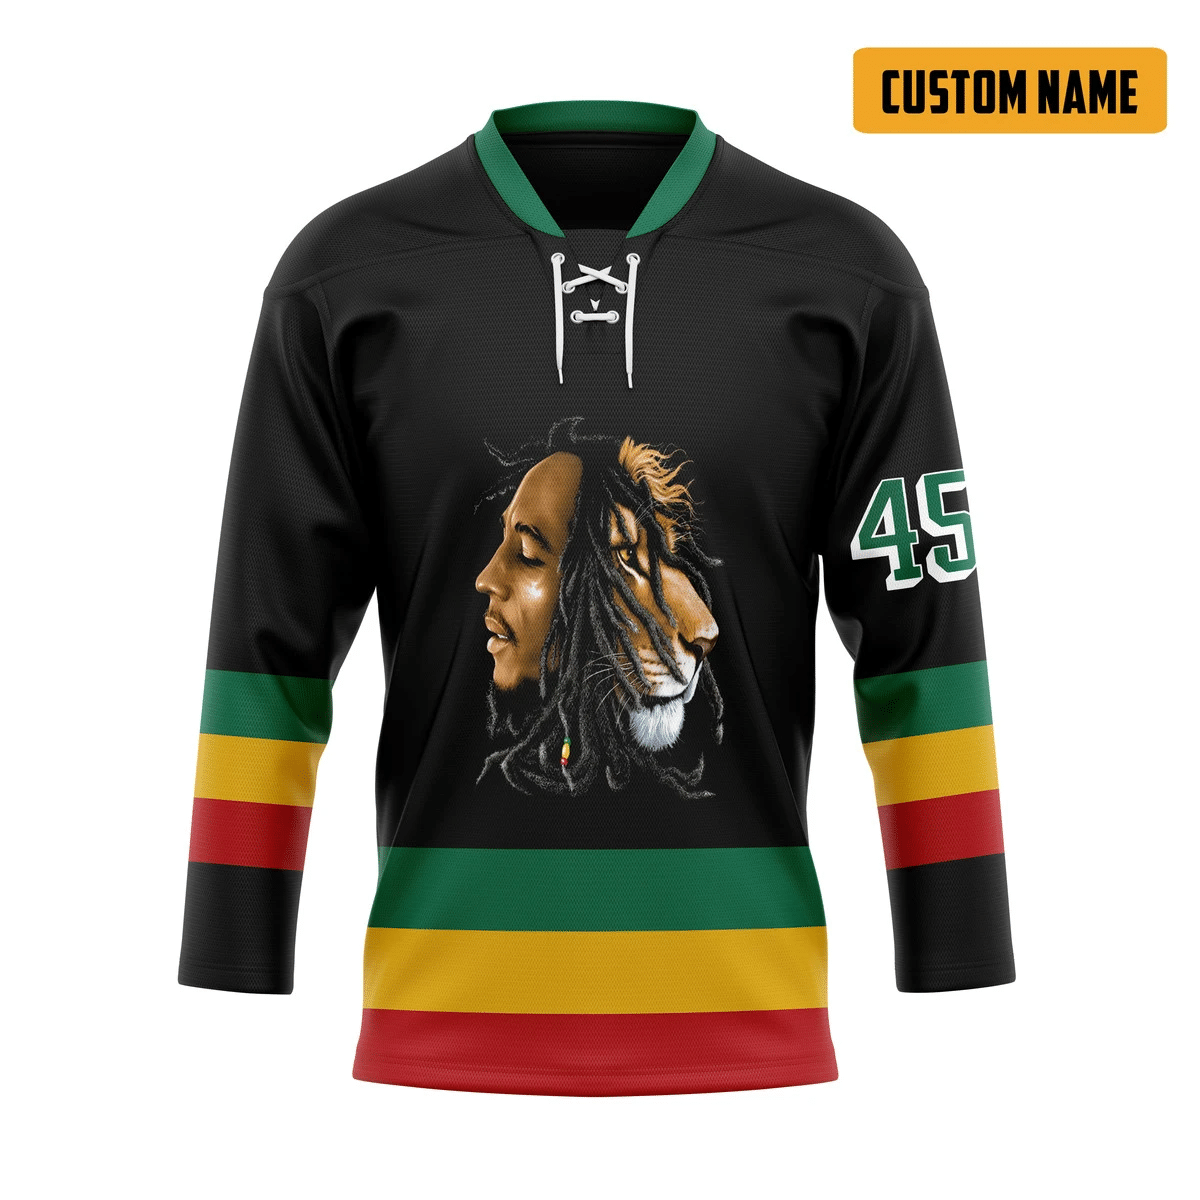 The style of a hockey jersey should match your personality. 47